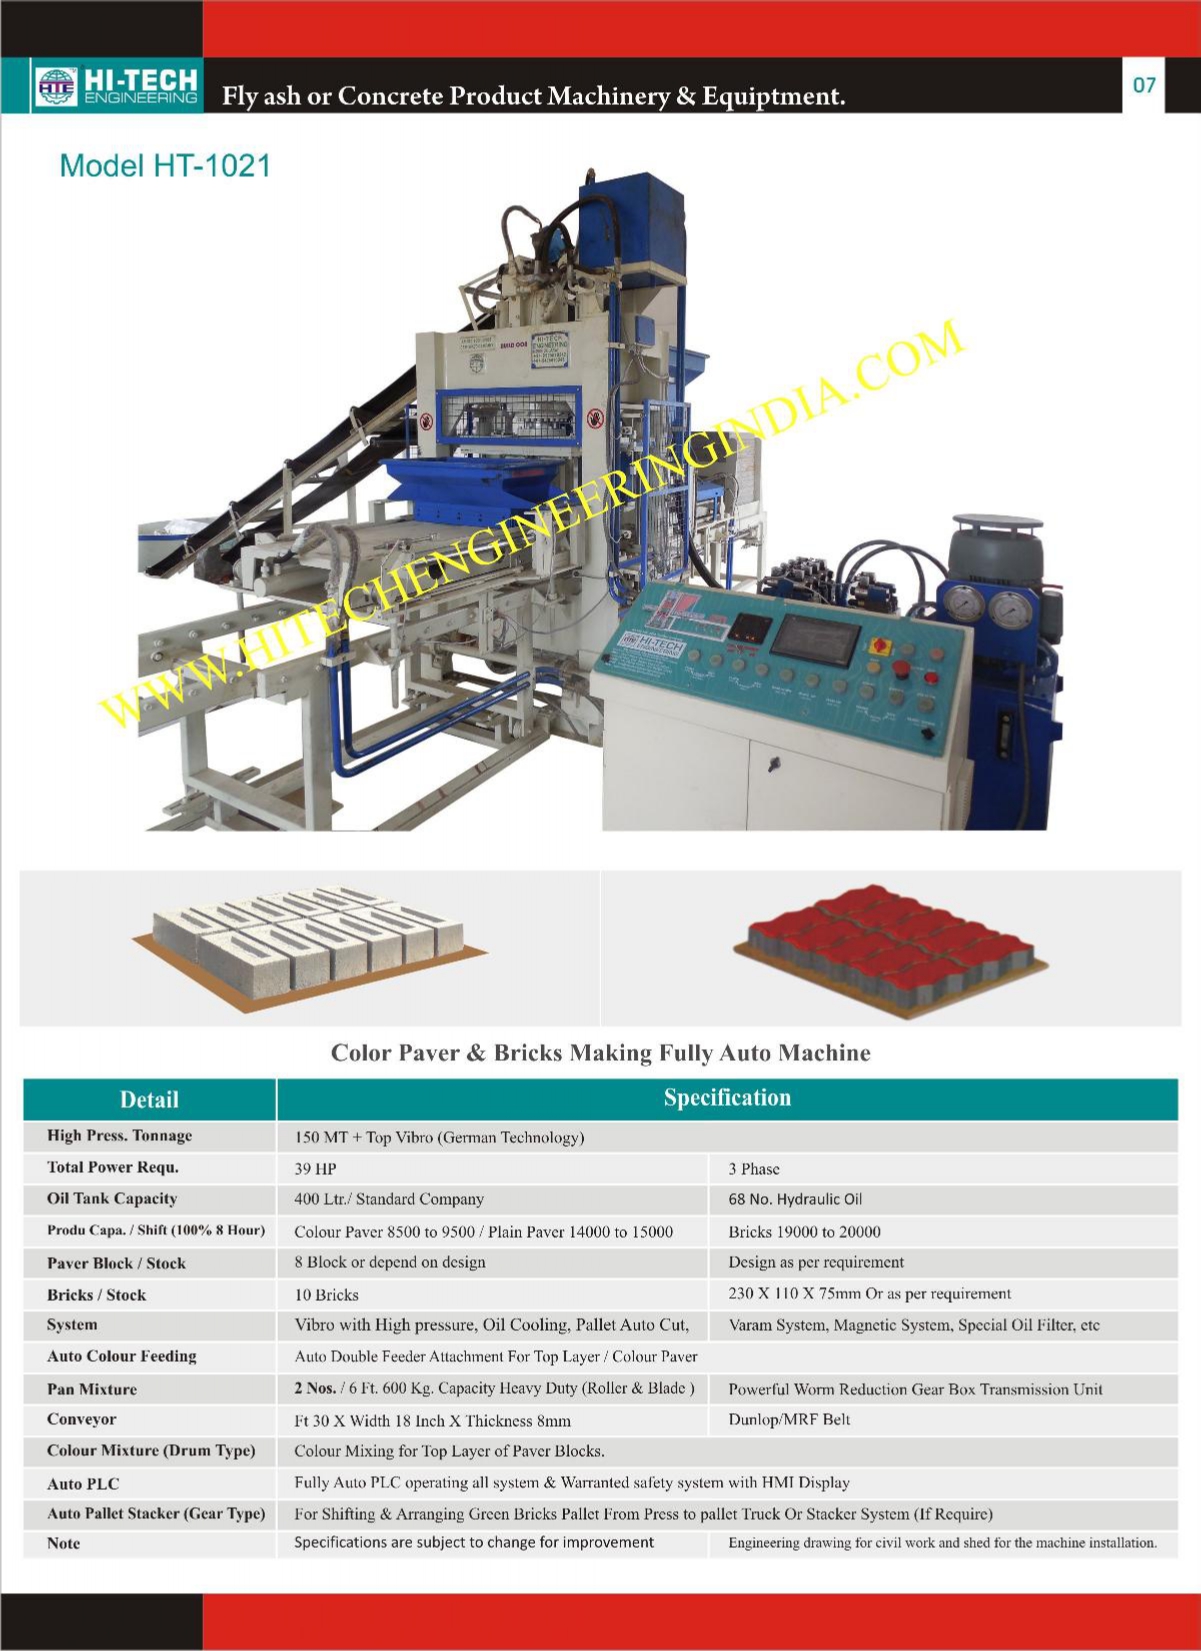 color paver &  bricks making fully auto machine from Hi Tech Engineering